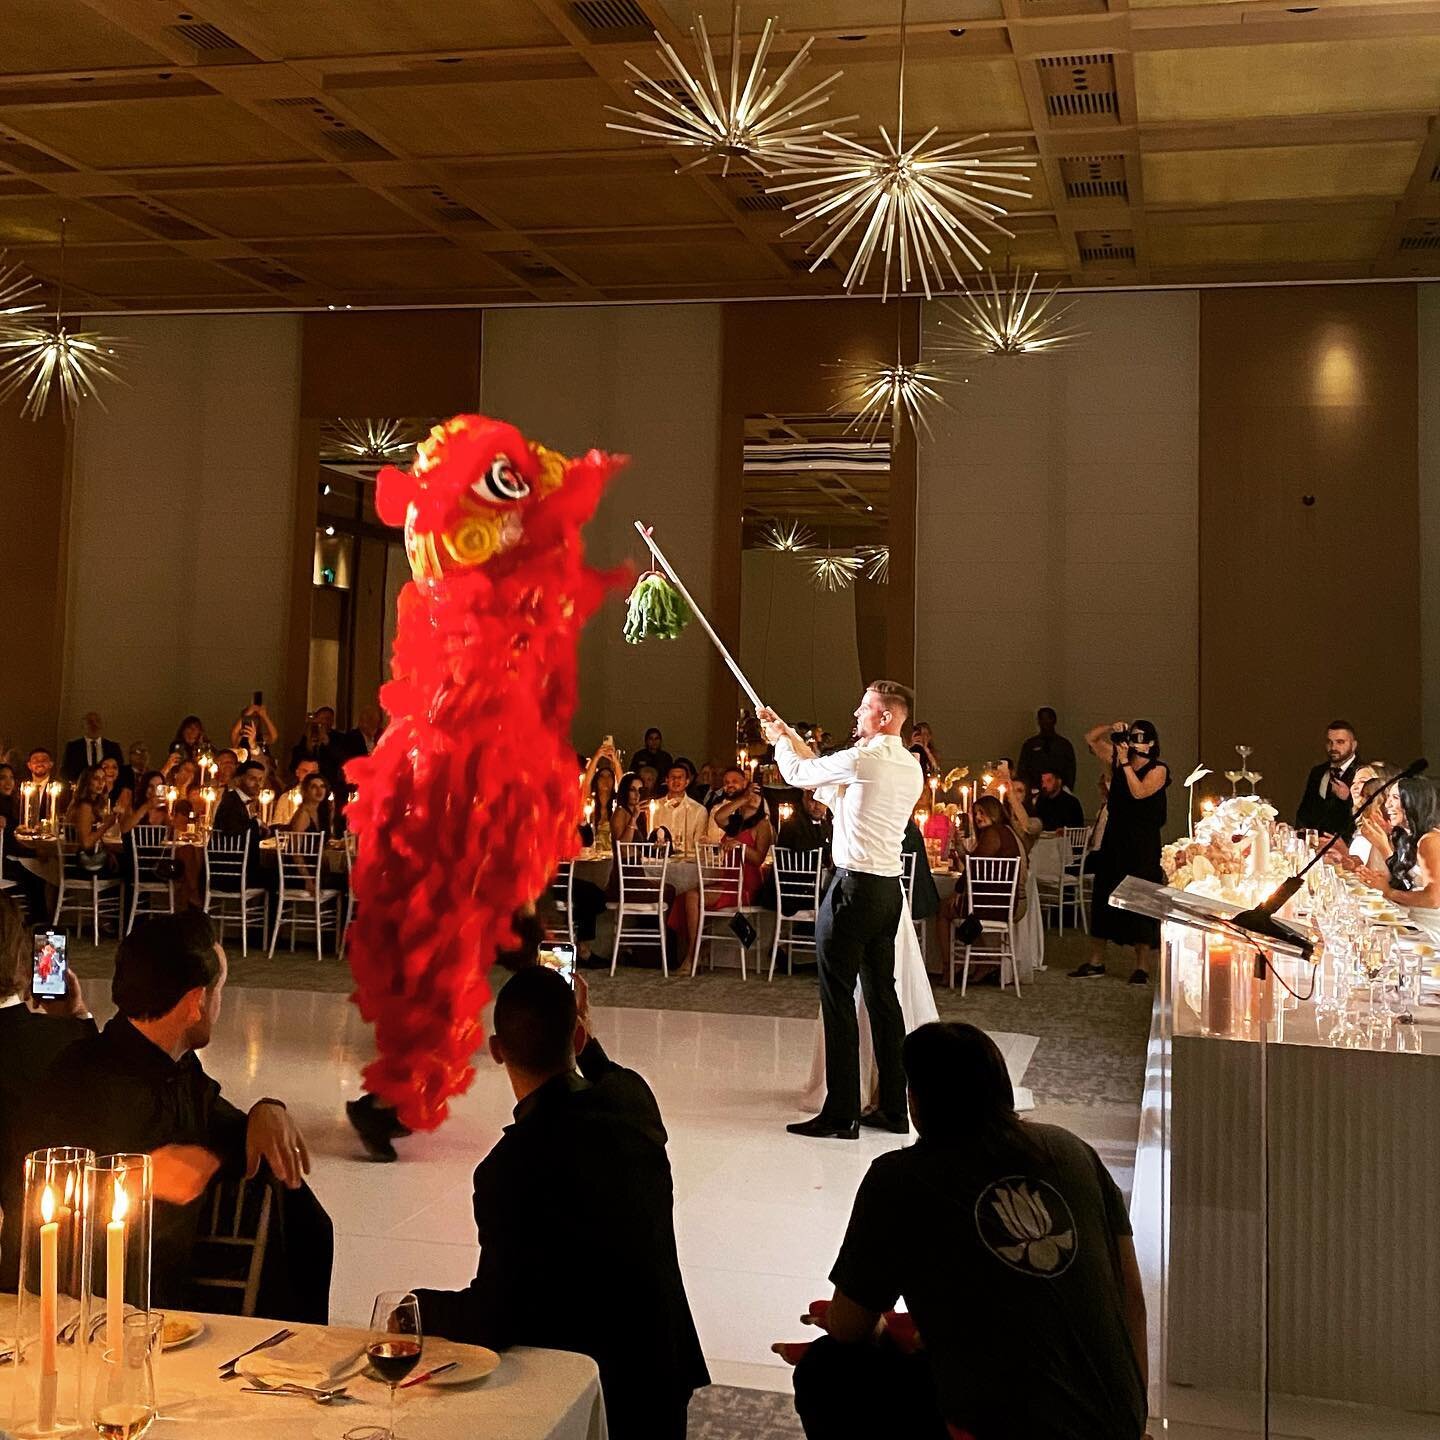 A massive Congratulations to Jason &amp; Pauline on tying the knot earlier this year 🍾

This magnificent celebration took place at @westinperth and included lion dancing and plate smashing paying tribute to the coming together of their Vietnamese &a